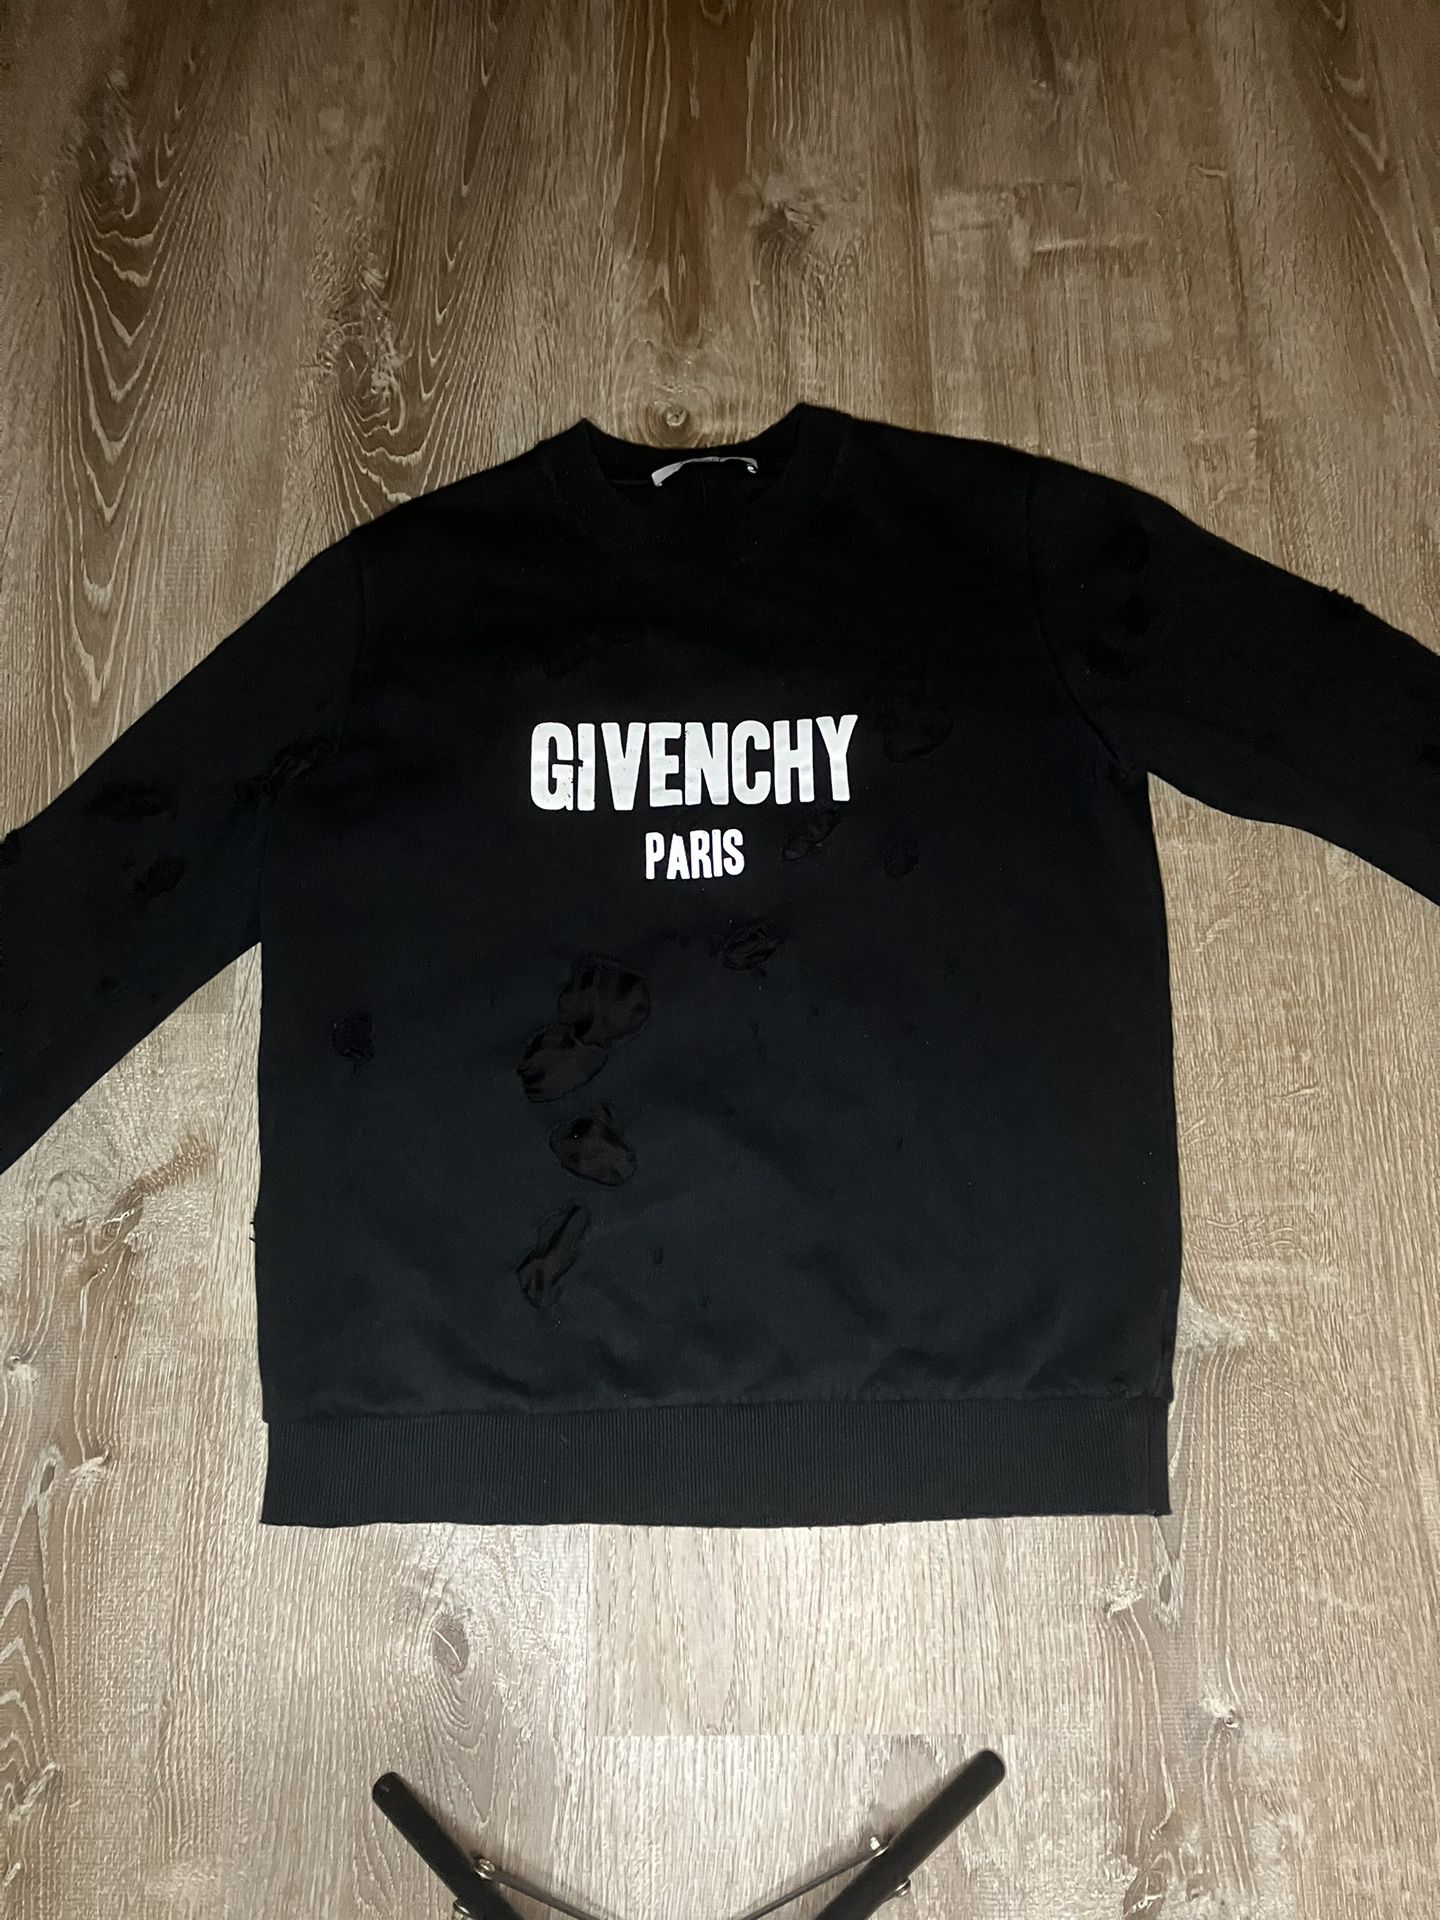 Givenchy Destroyed Sweatshirt- Size Small